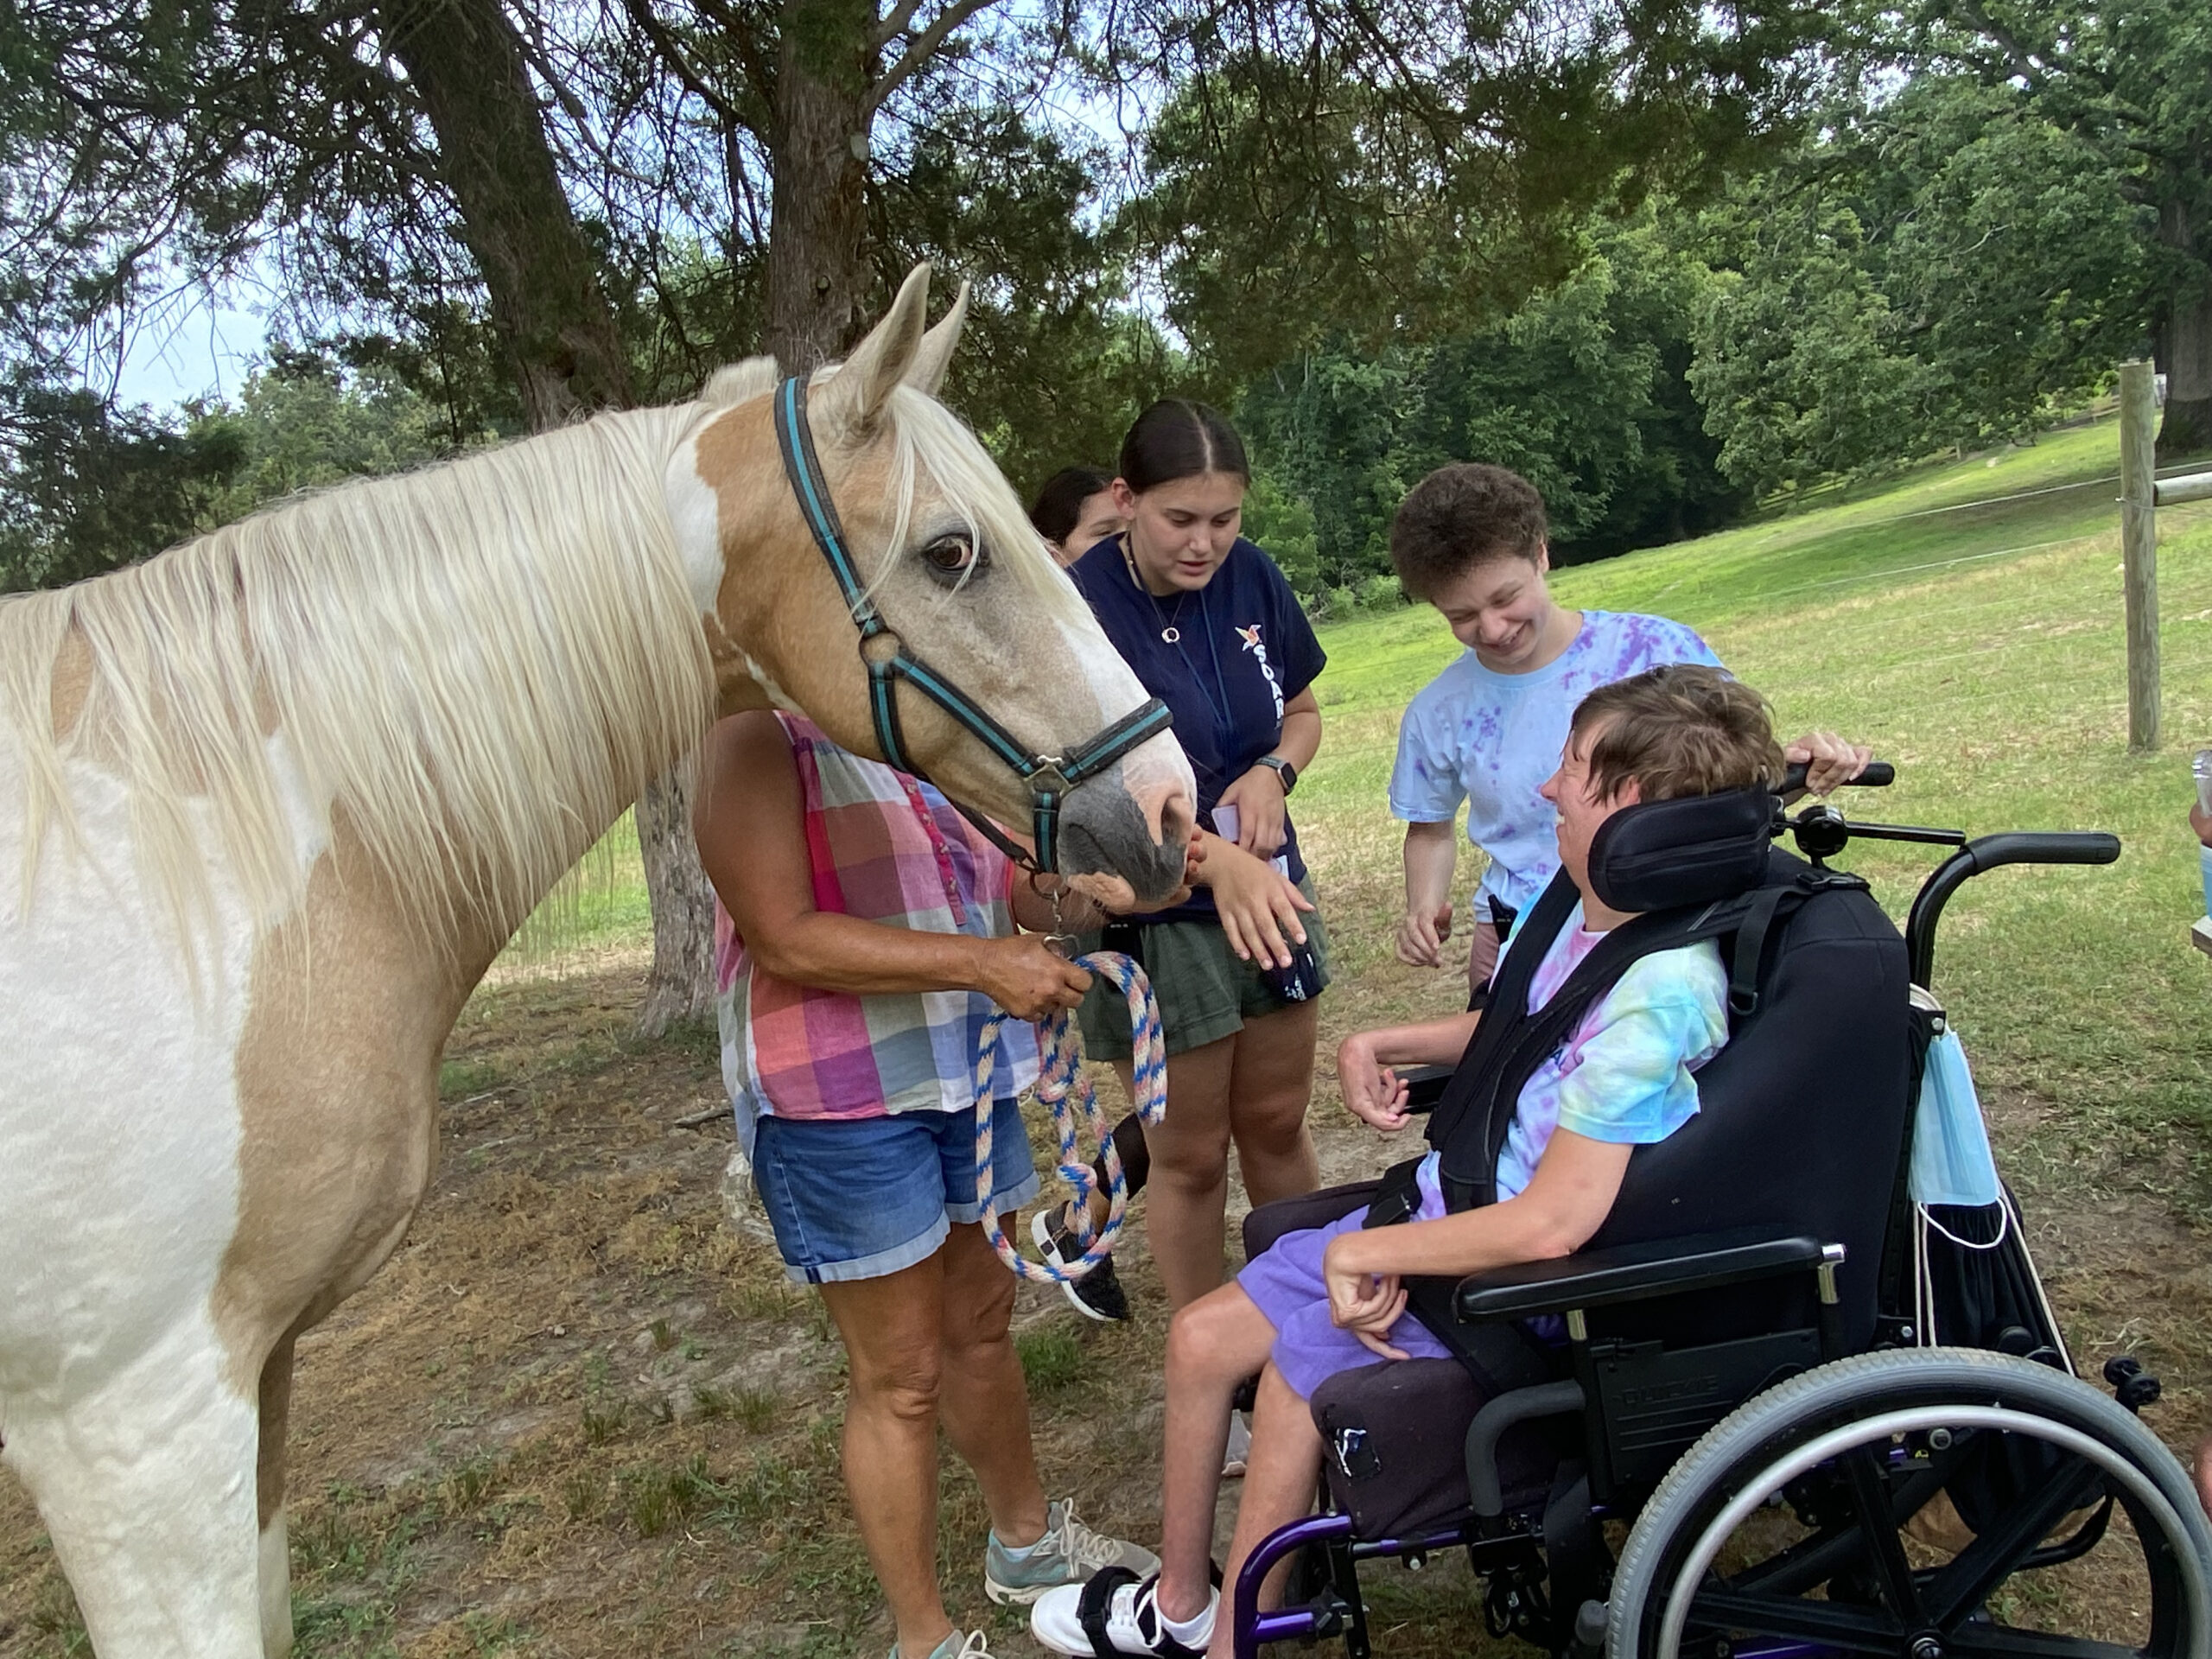 Woman with disabilities in wheel chair visits with camp counselors and a horse